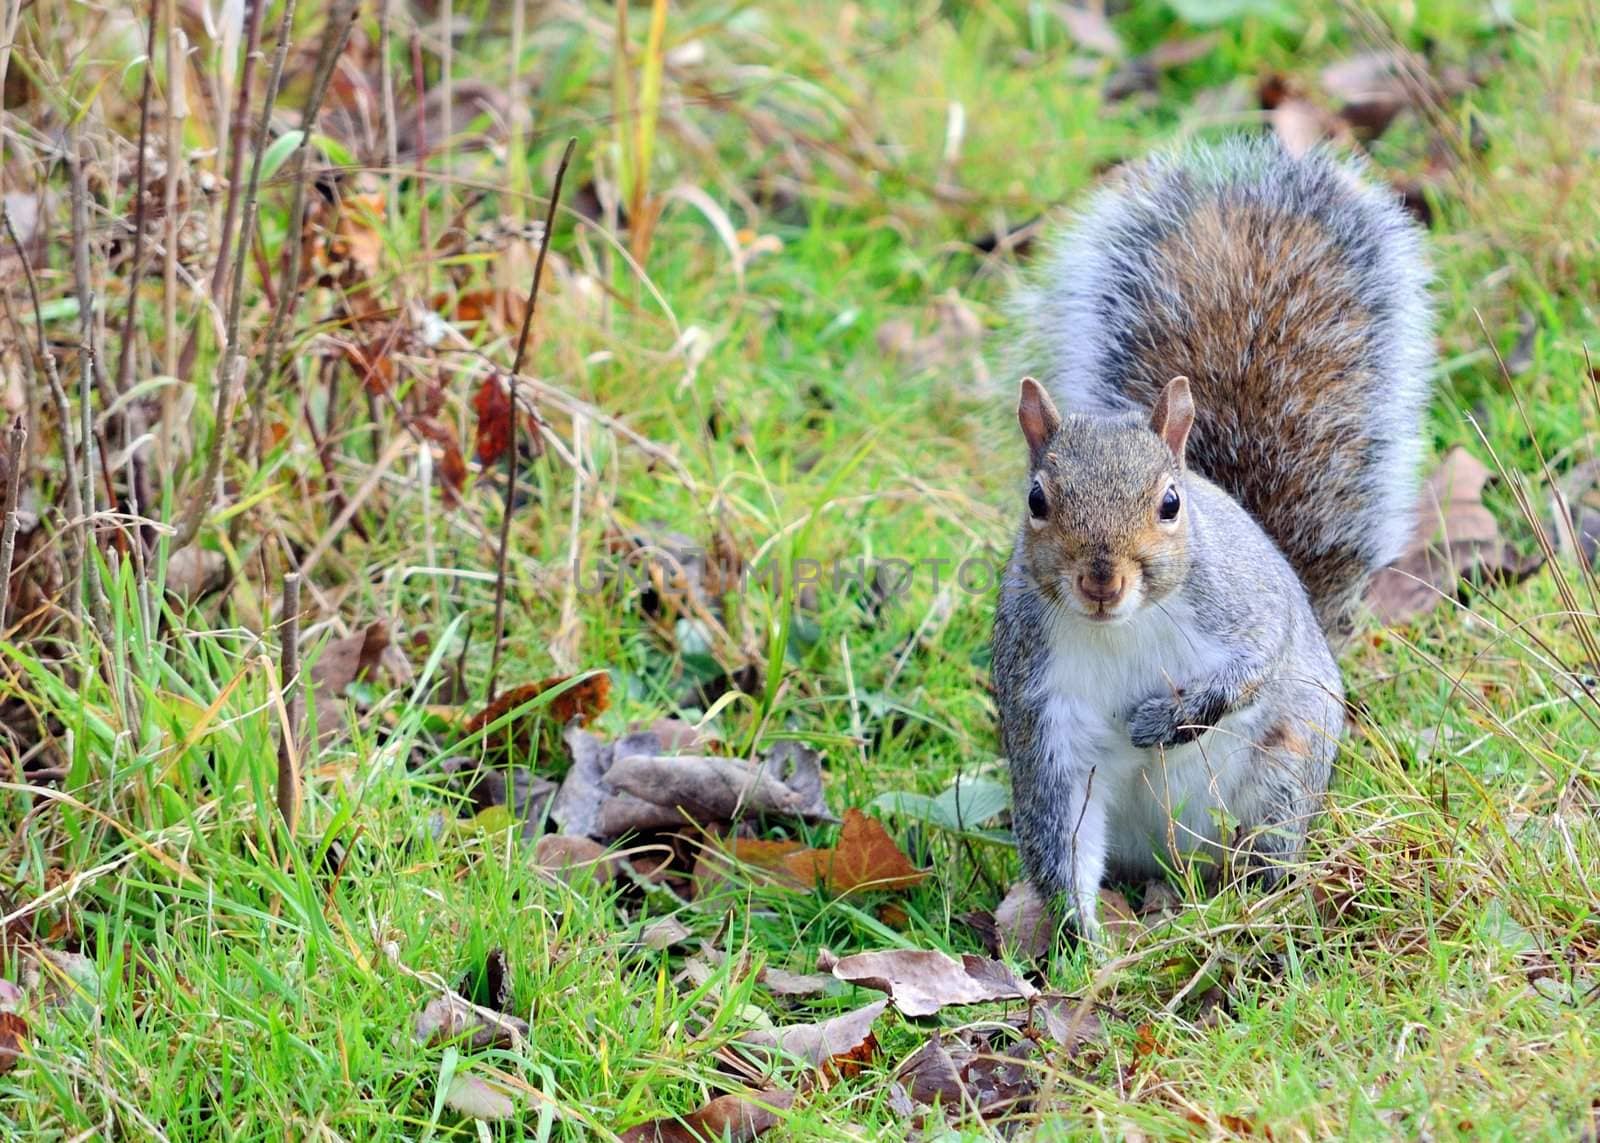 A gray squirrel standing in the grass.